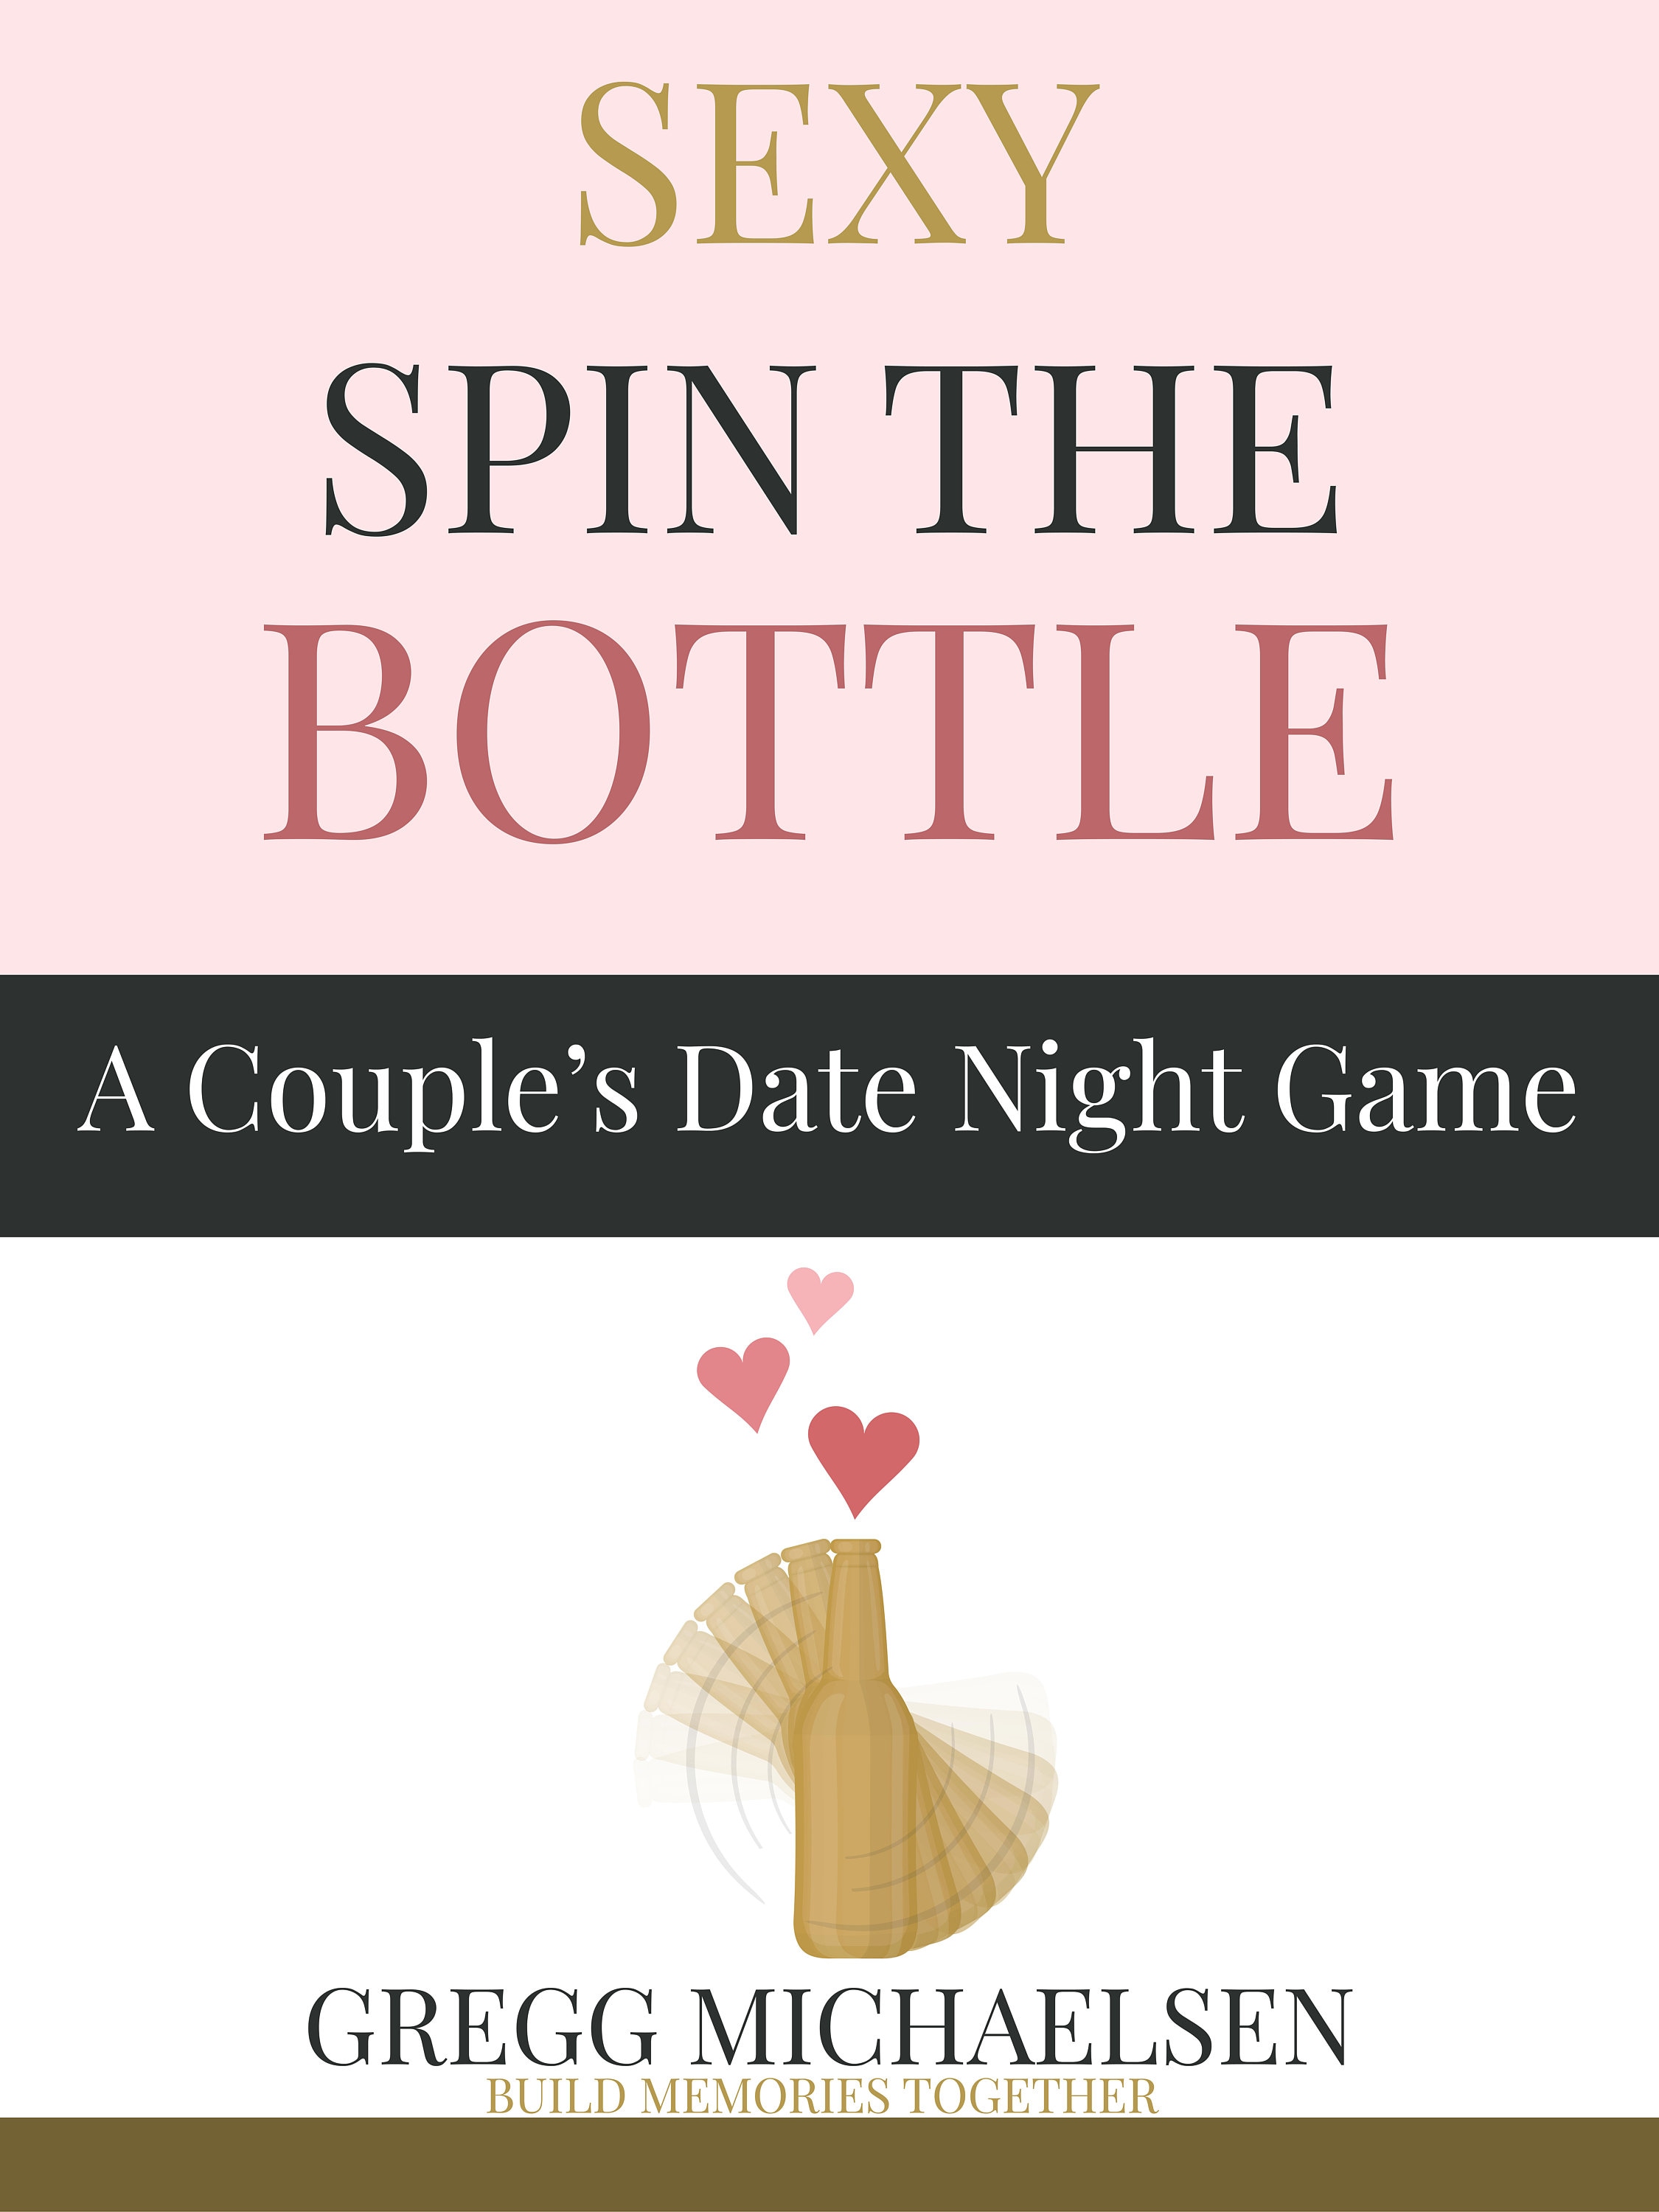 aoife dullaghan recommends sexy spin the bottle pic